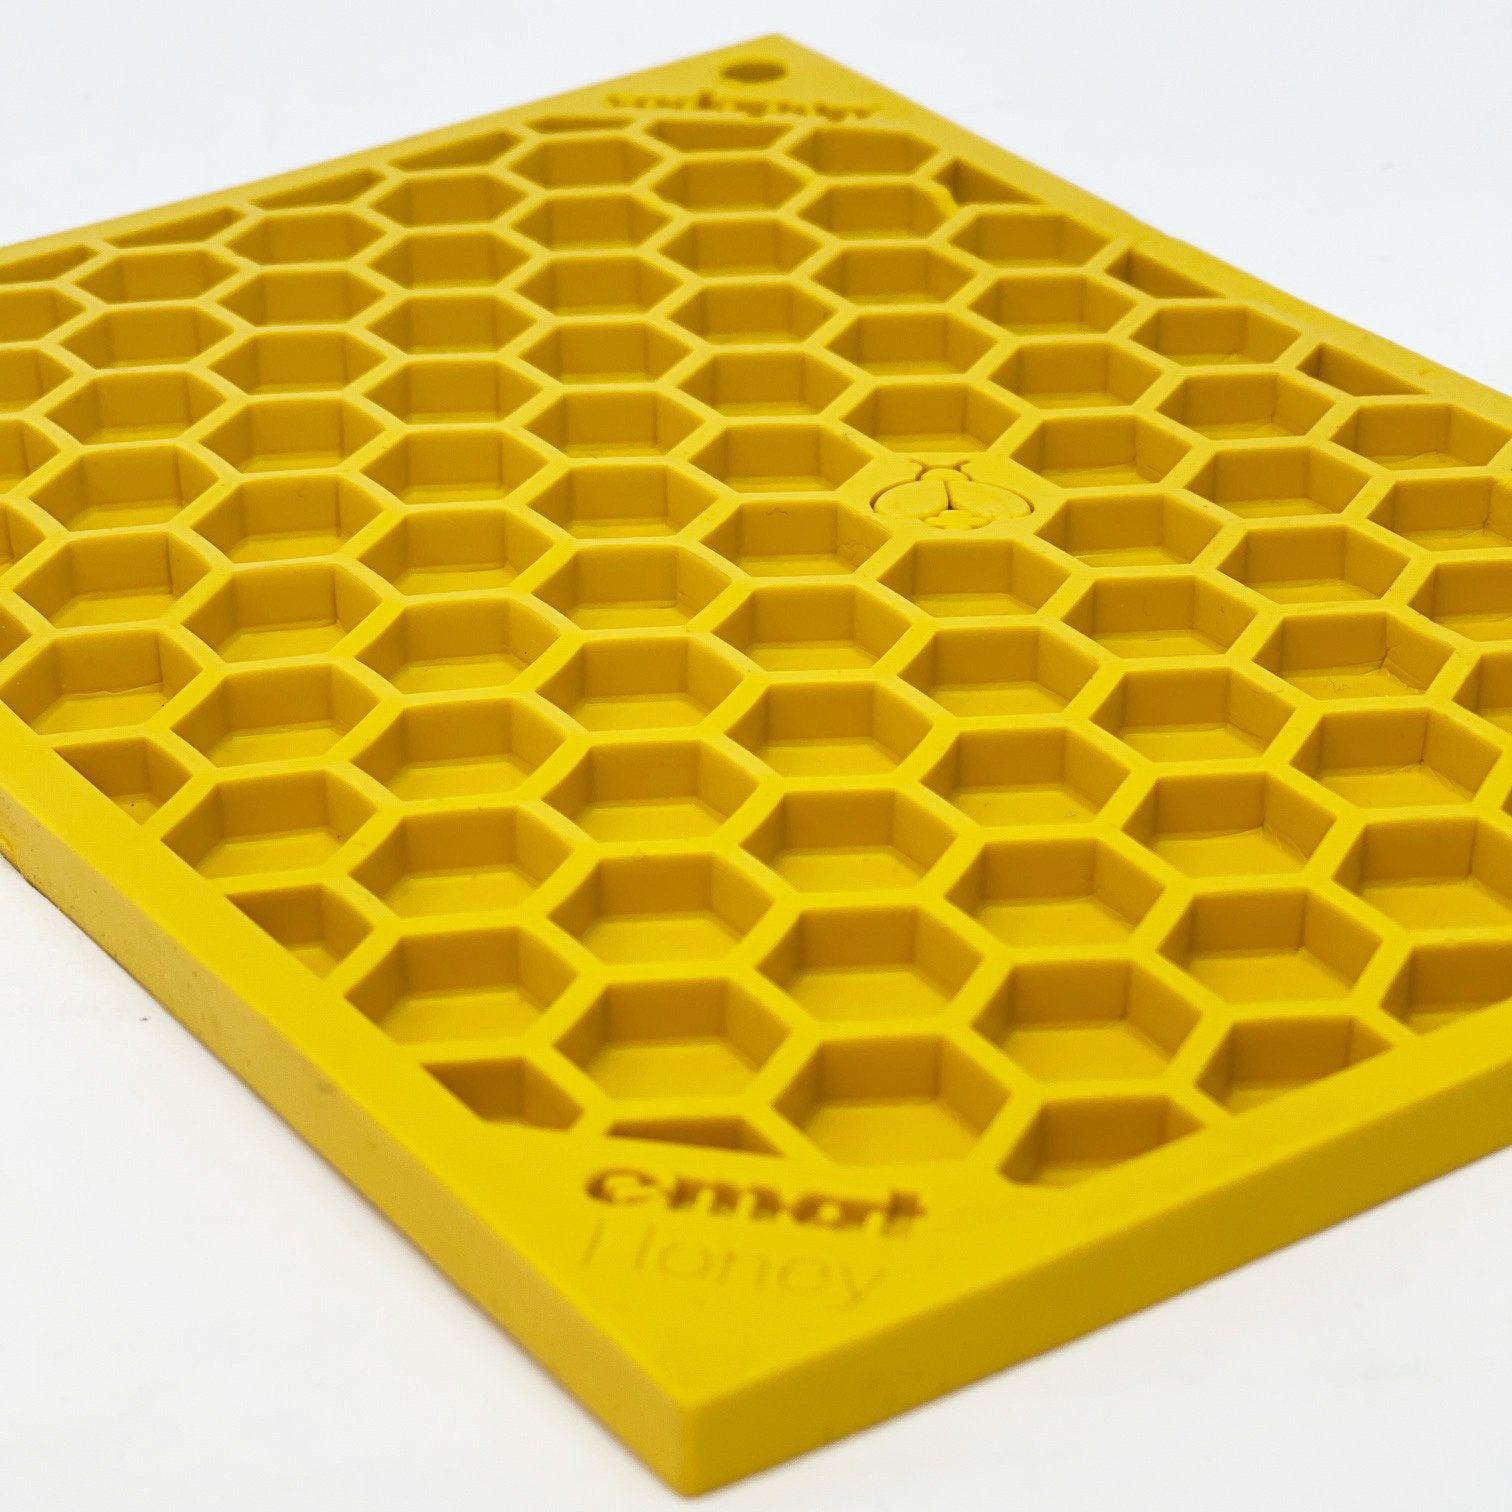 Yellow silicone Your Whole Dog Soda Pup EMAT ENRICHMENT LICKING MAT honeycomb-shaped enrichment mats on a white background.